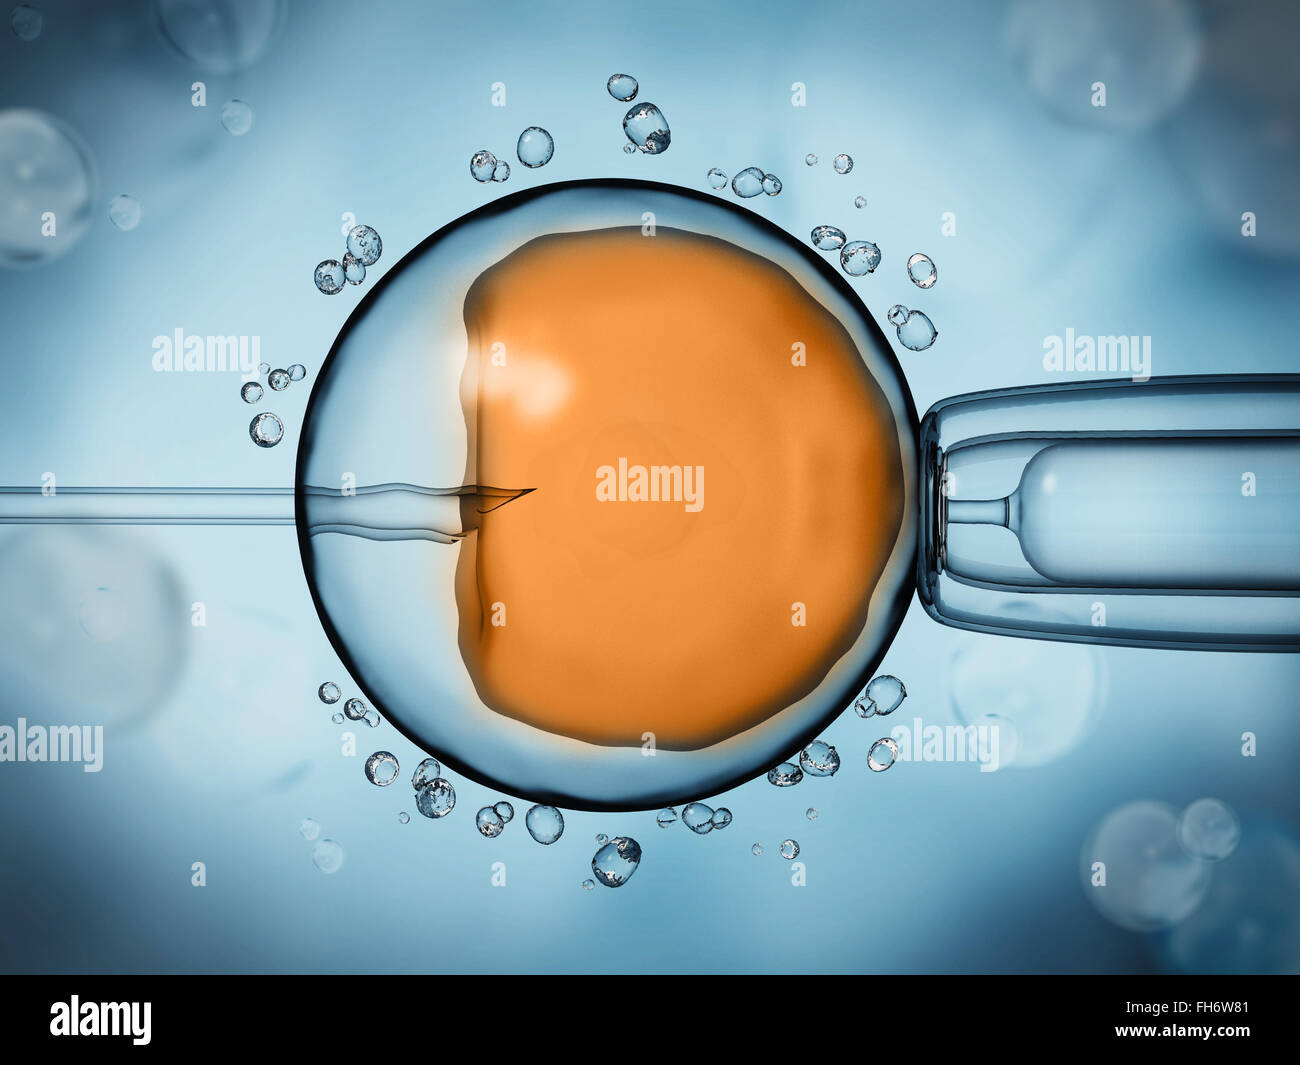 Artificial Insemination Illustration Showing The Ovule On Blue